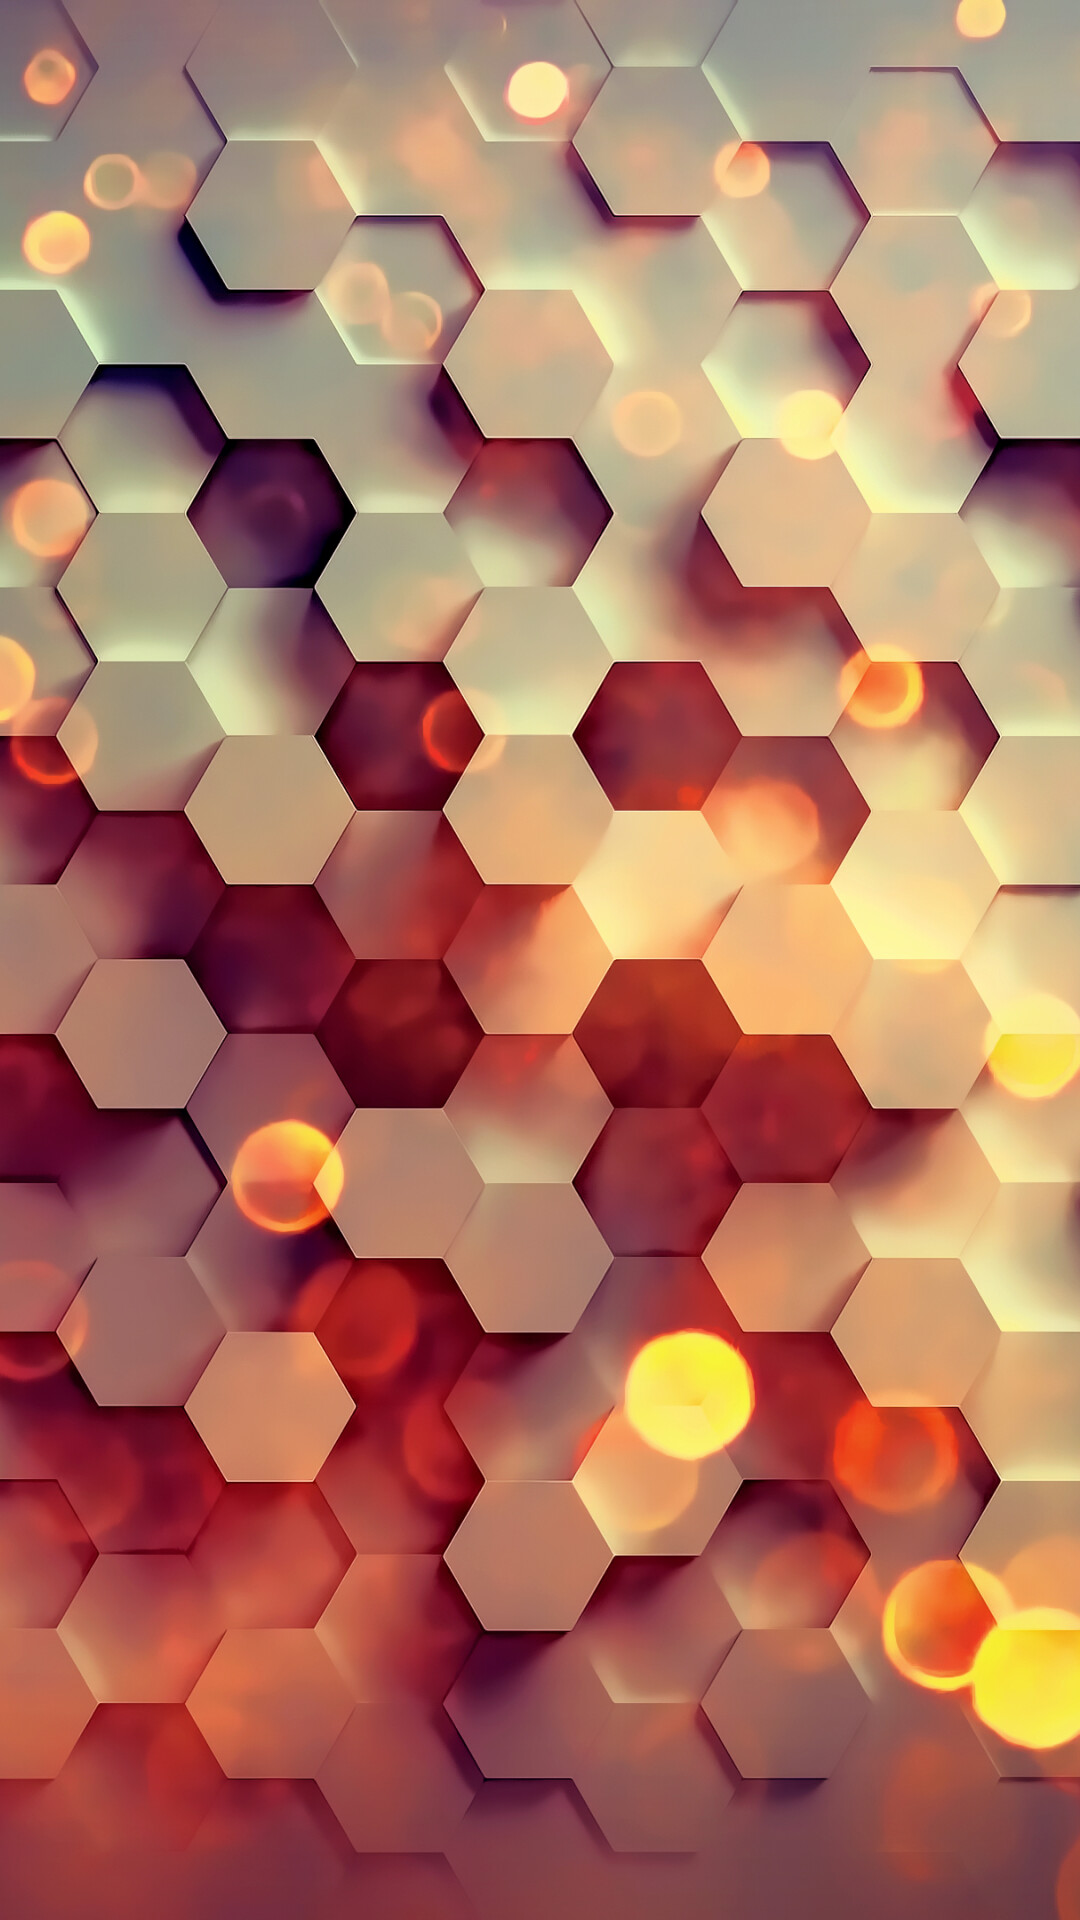 Geometric Abstract: Hexagons, Circles, Obtuse angles, Circles. 1080x1920 Full HD Background.